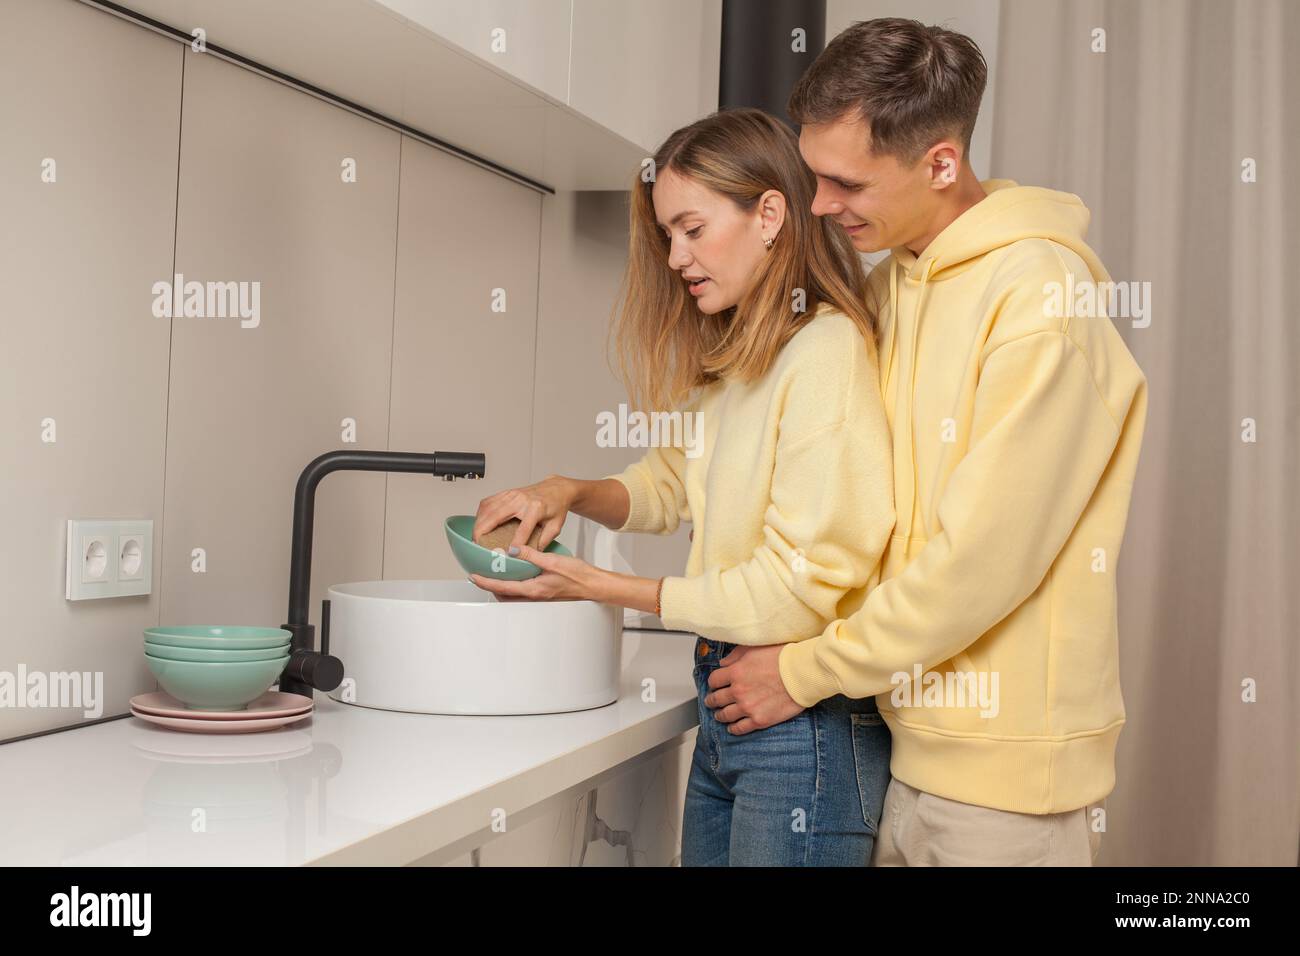 https://c8.alamy.com/comp/2NNA2C0/portrait-of-man-and-woman-couple-hugging-and-washing-the-dishes-together-in-the-kitchen-2NNA2C0.jpg